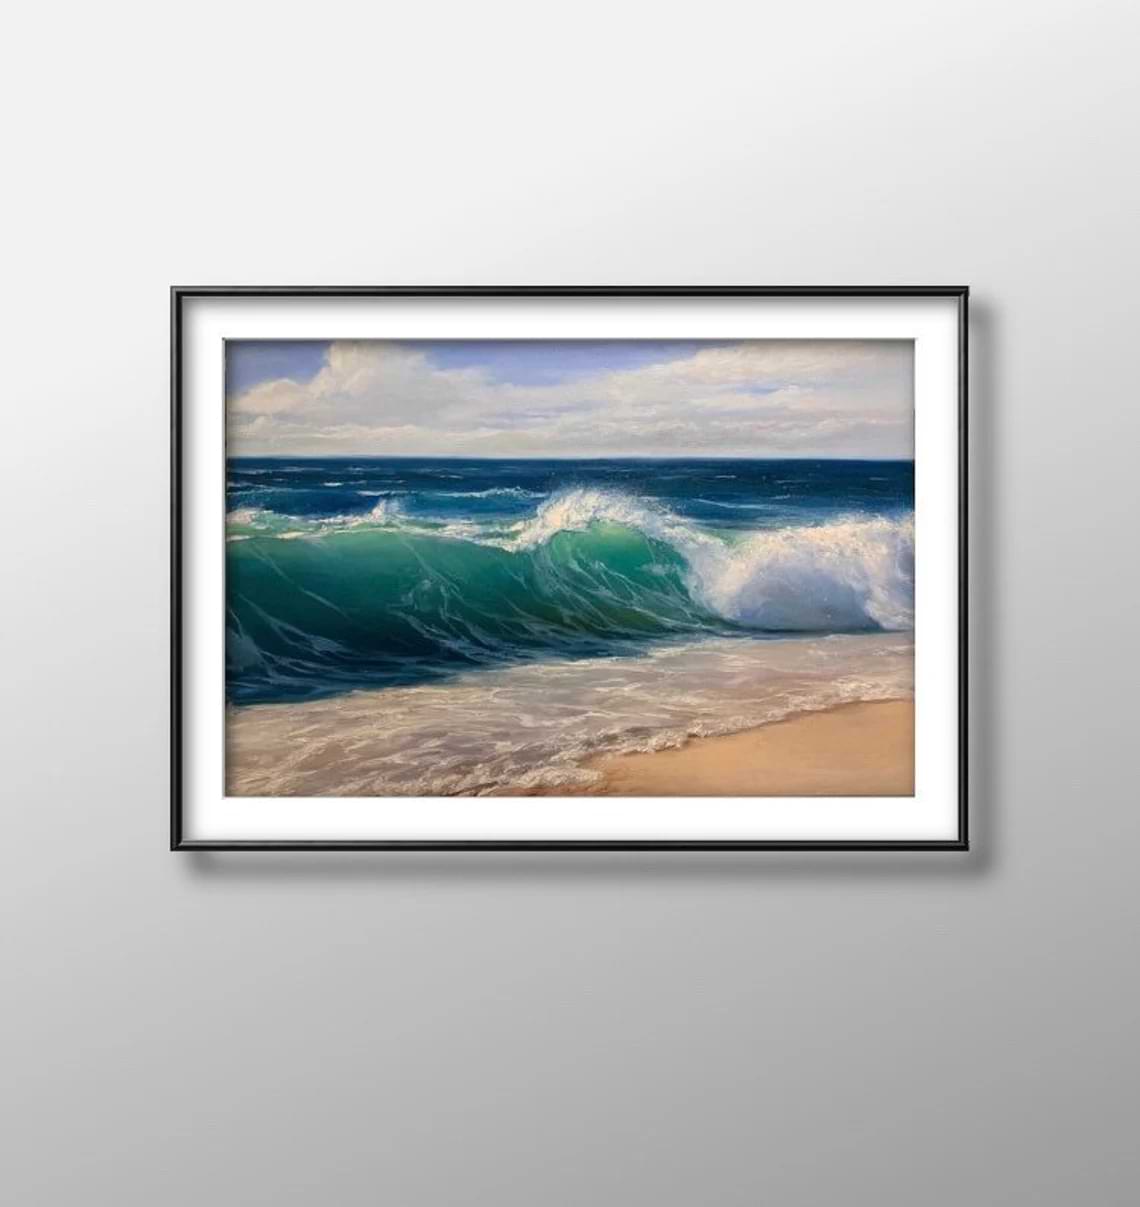 "Content" - Seascape Artwork Sample on Wall